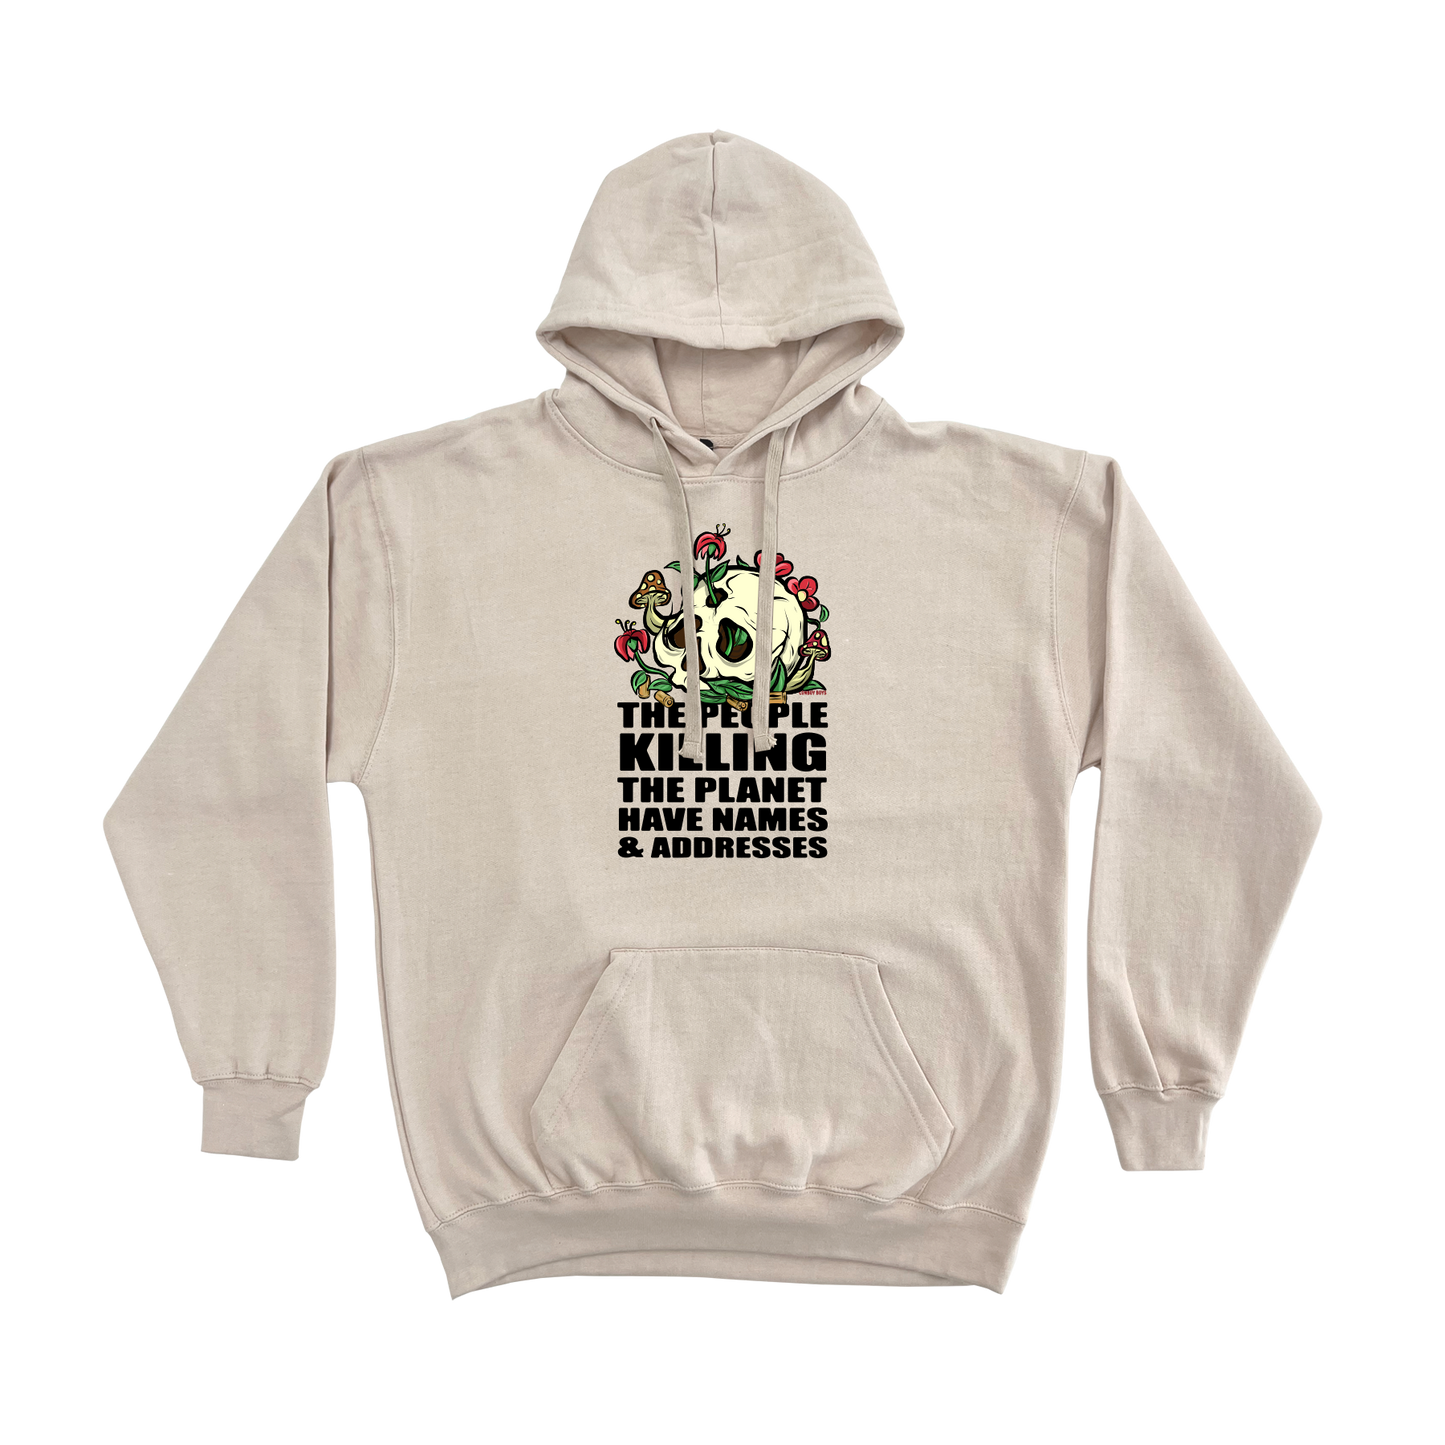 Names & Addresses Every Day Hoodie, Sand